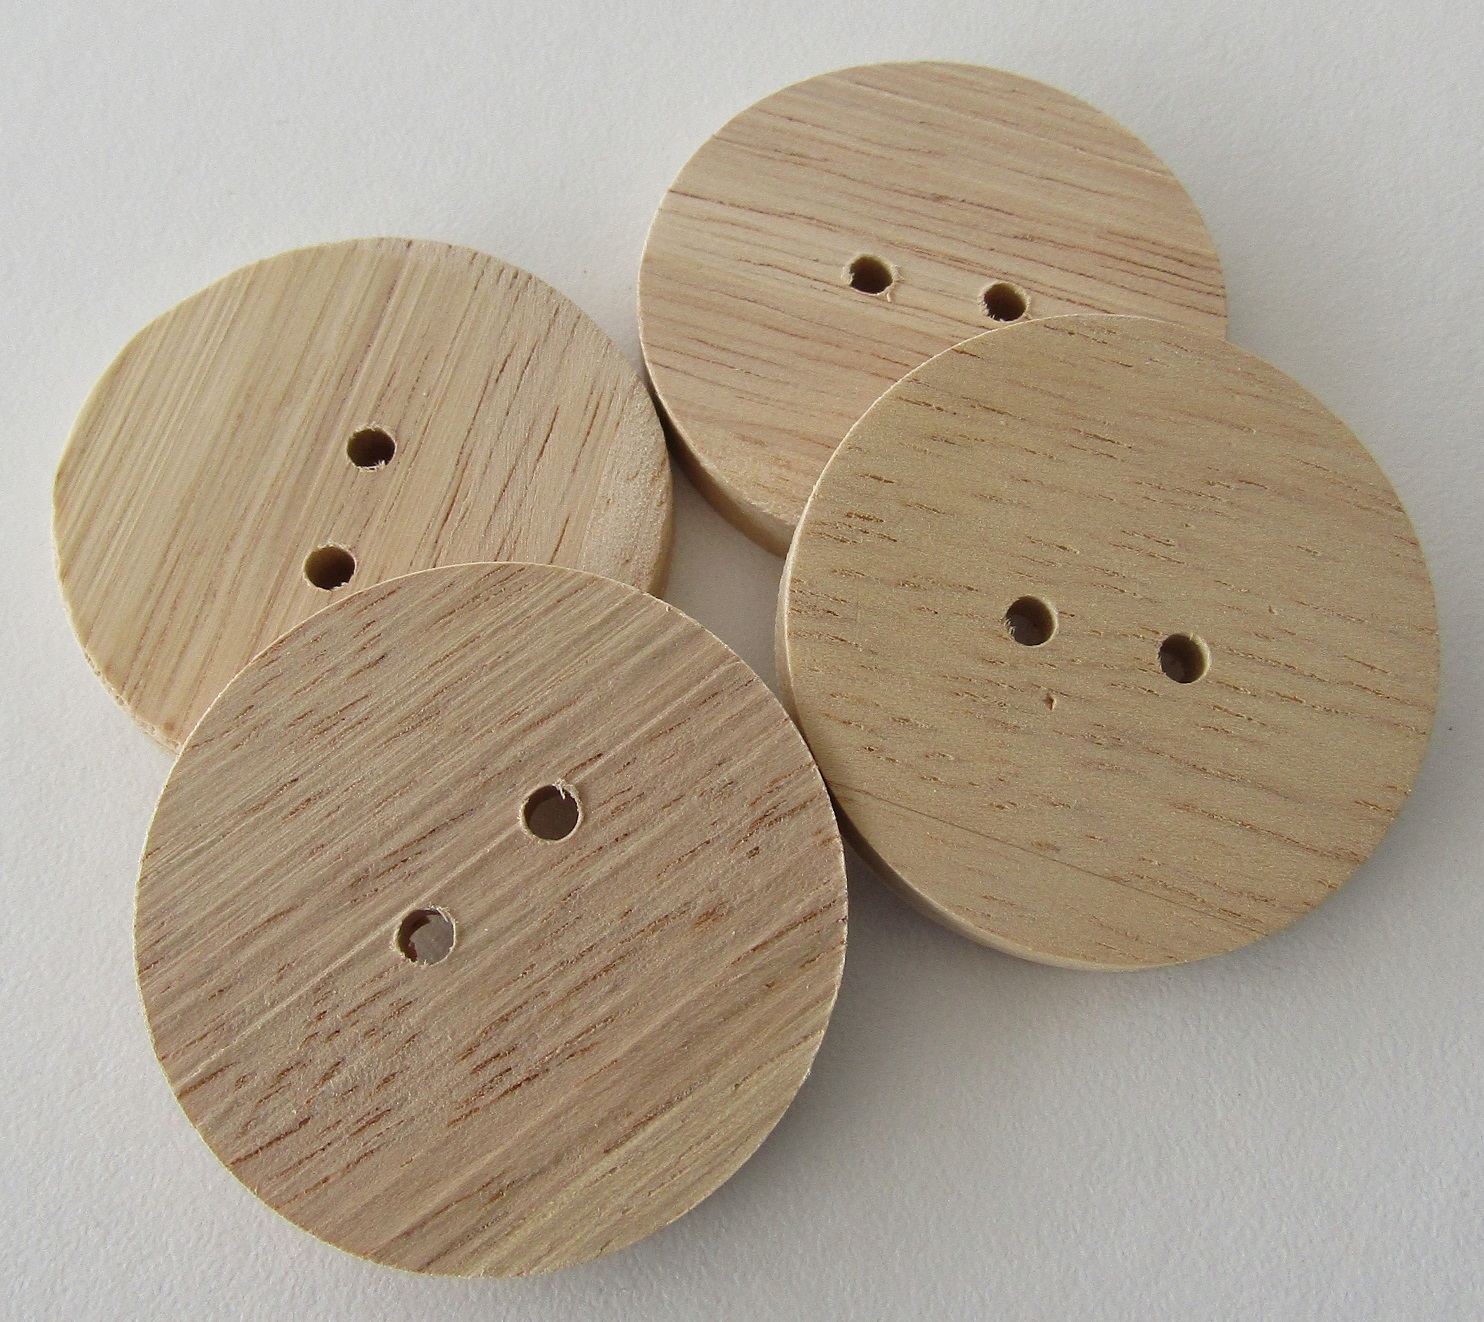 Unfinished Wooden Buttons for Crafts and Sewing 1/2 inch Bulk Pack of 2500  Decorative Buttons by Woodpeckers 